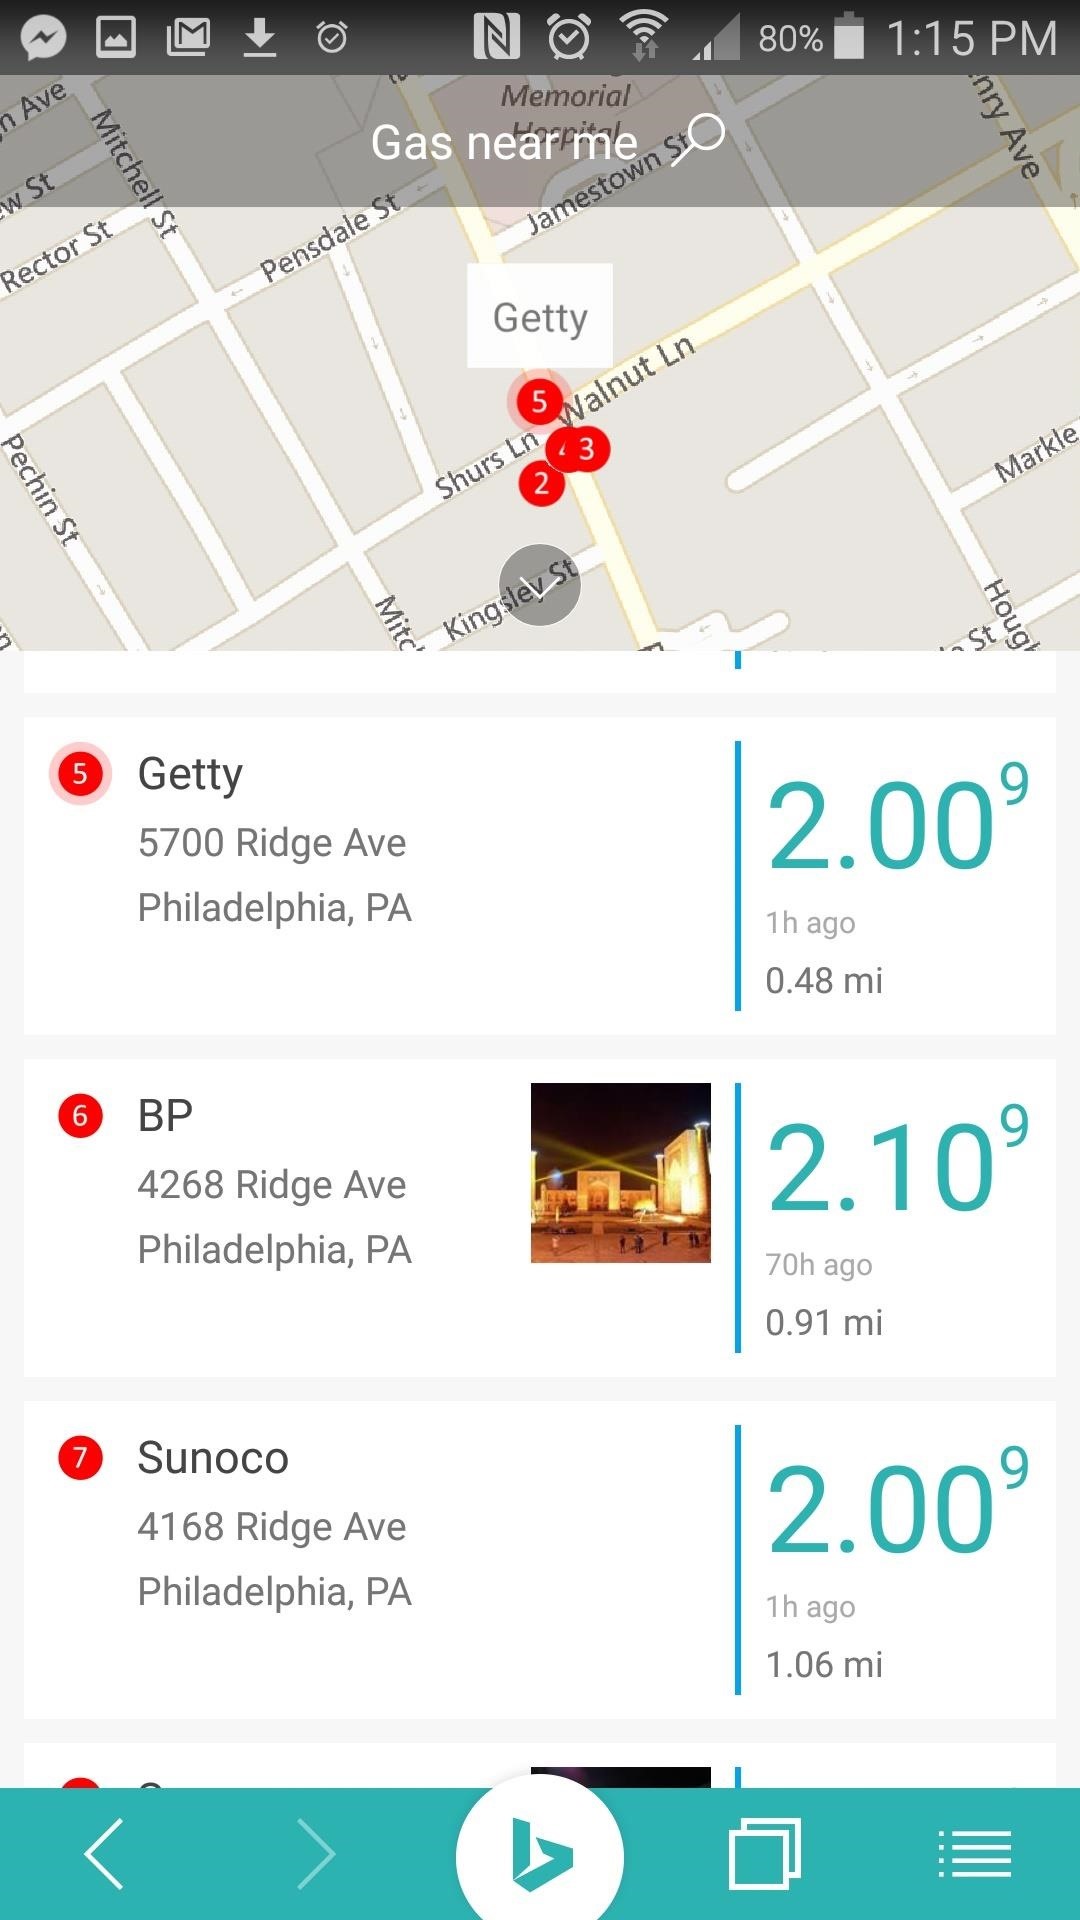 Bing Update for Android & iOS Shows Gas Prices & Deals in Your Area